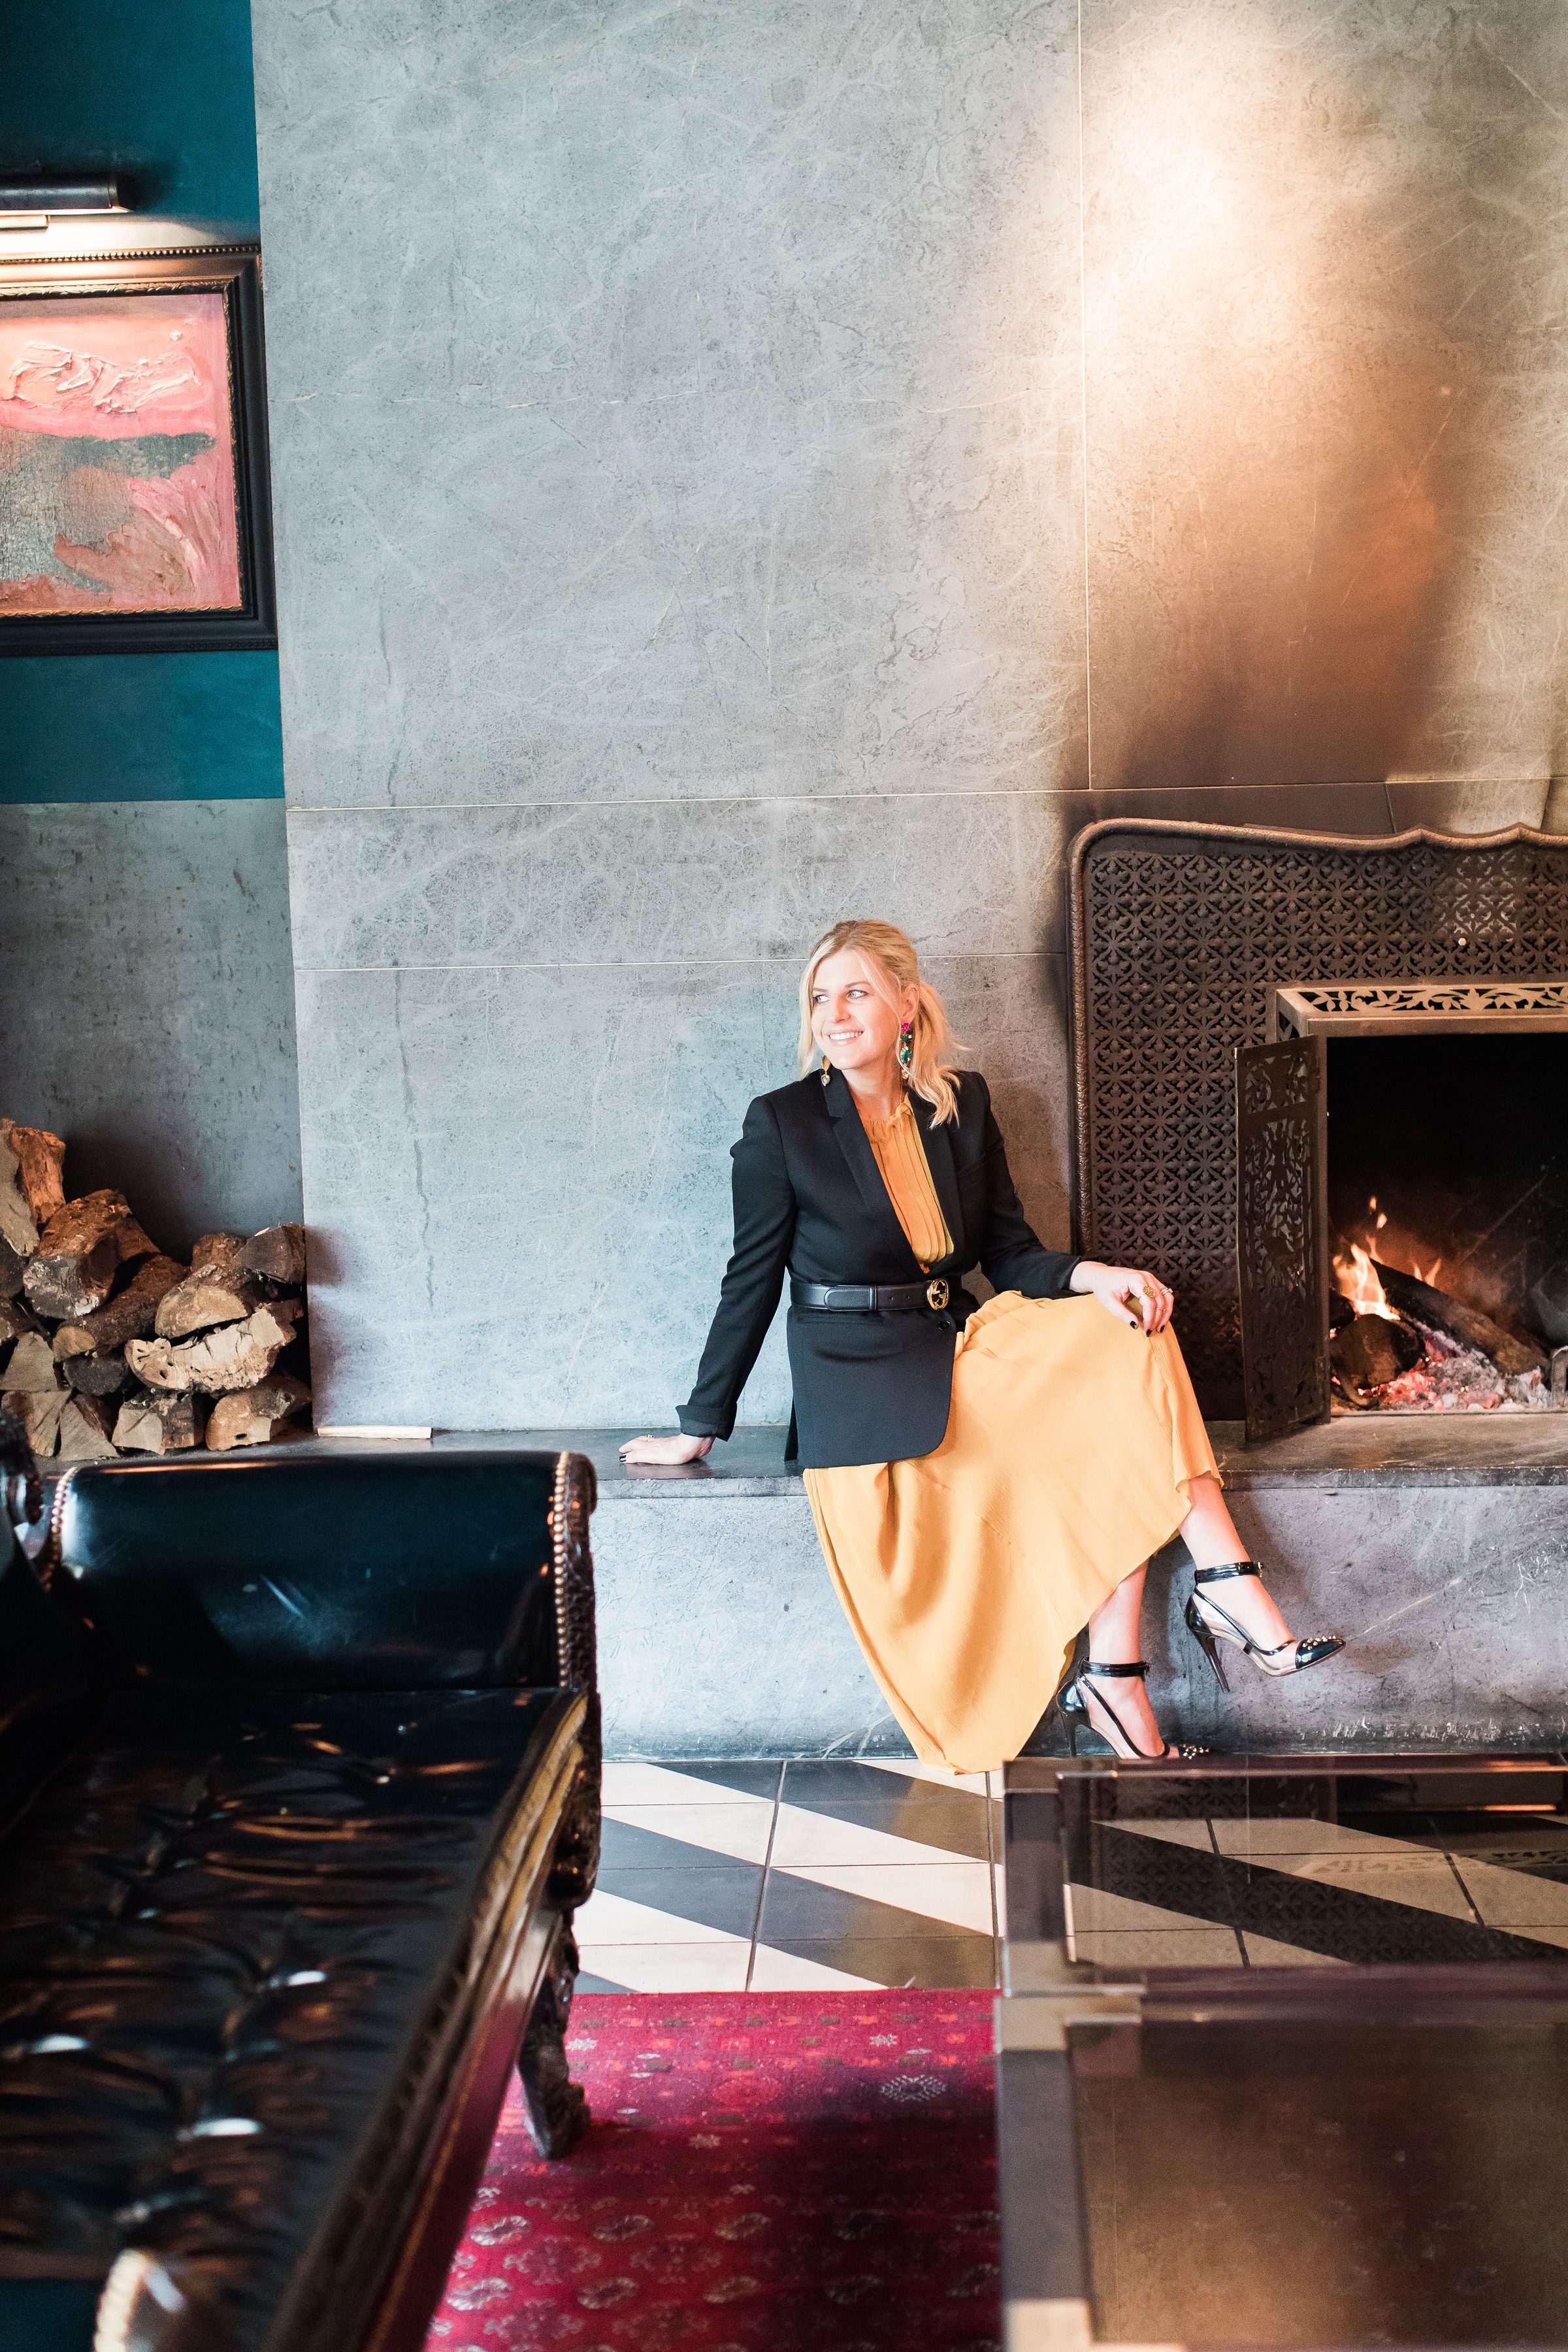 Looking for the coolest hotel in Austin? Look no further than the Hotel Saint Cecilia, a luxury boutique hotel by Bunkhouse.